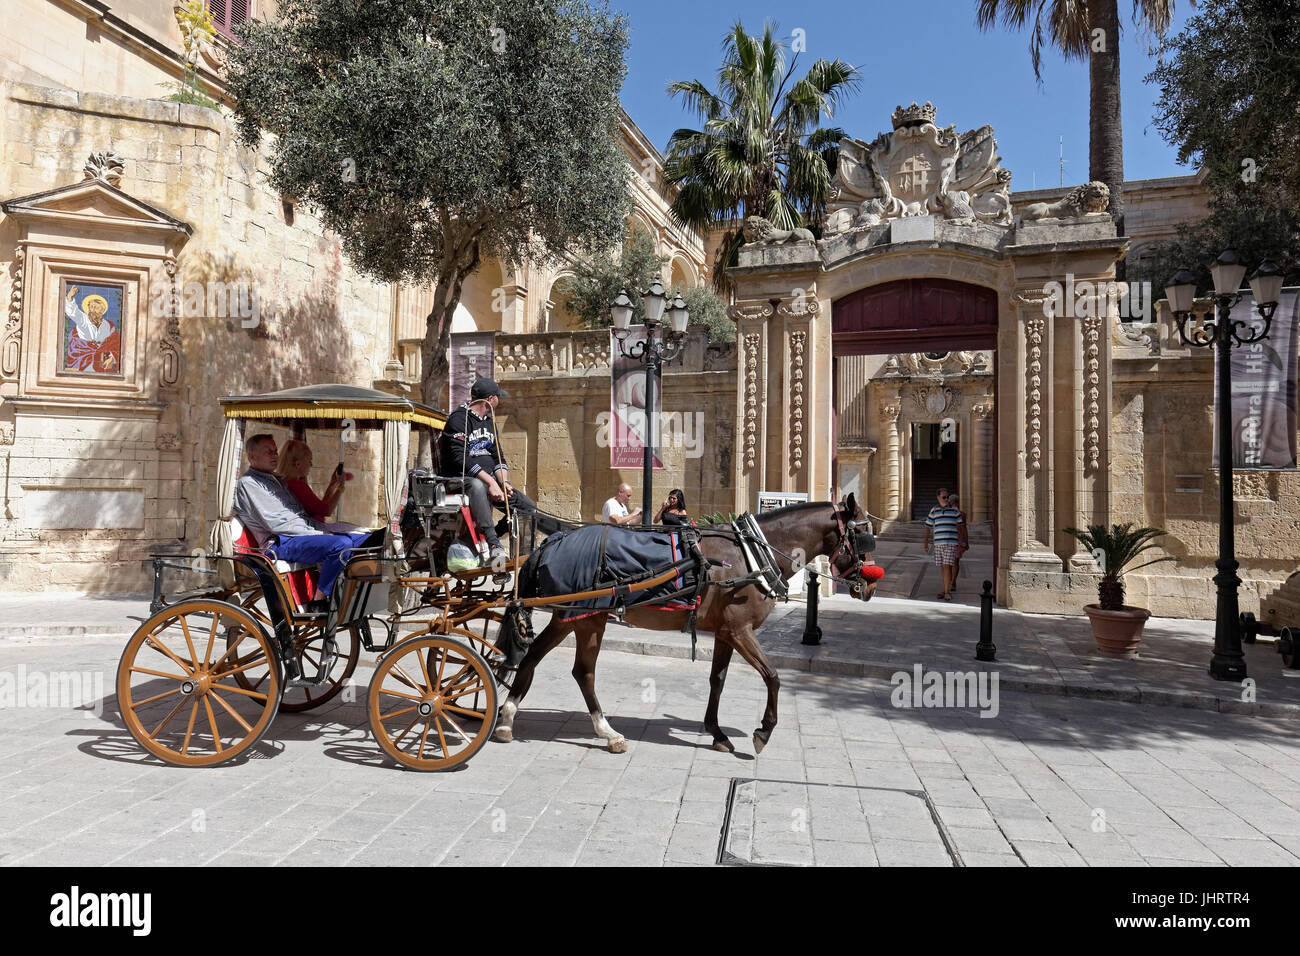 Horse carriage in front of Palazzo Vilhena, Natural History Museum, Mdina, Malta Stock Photo